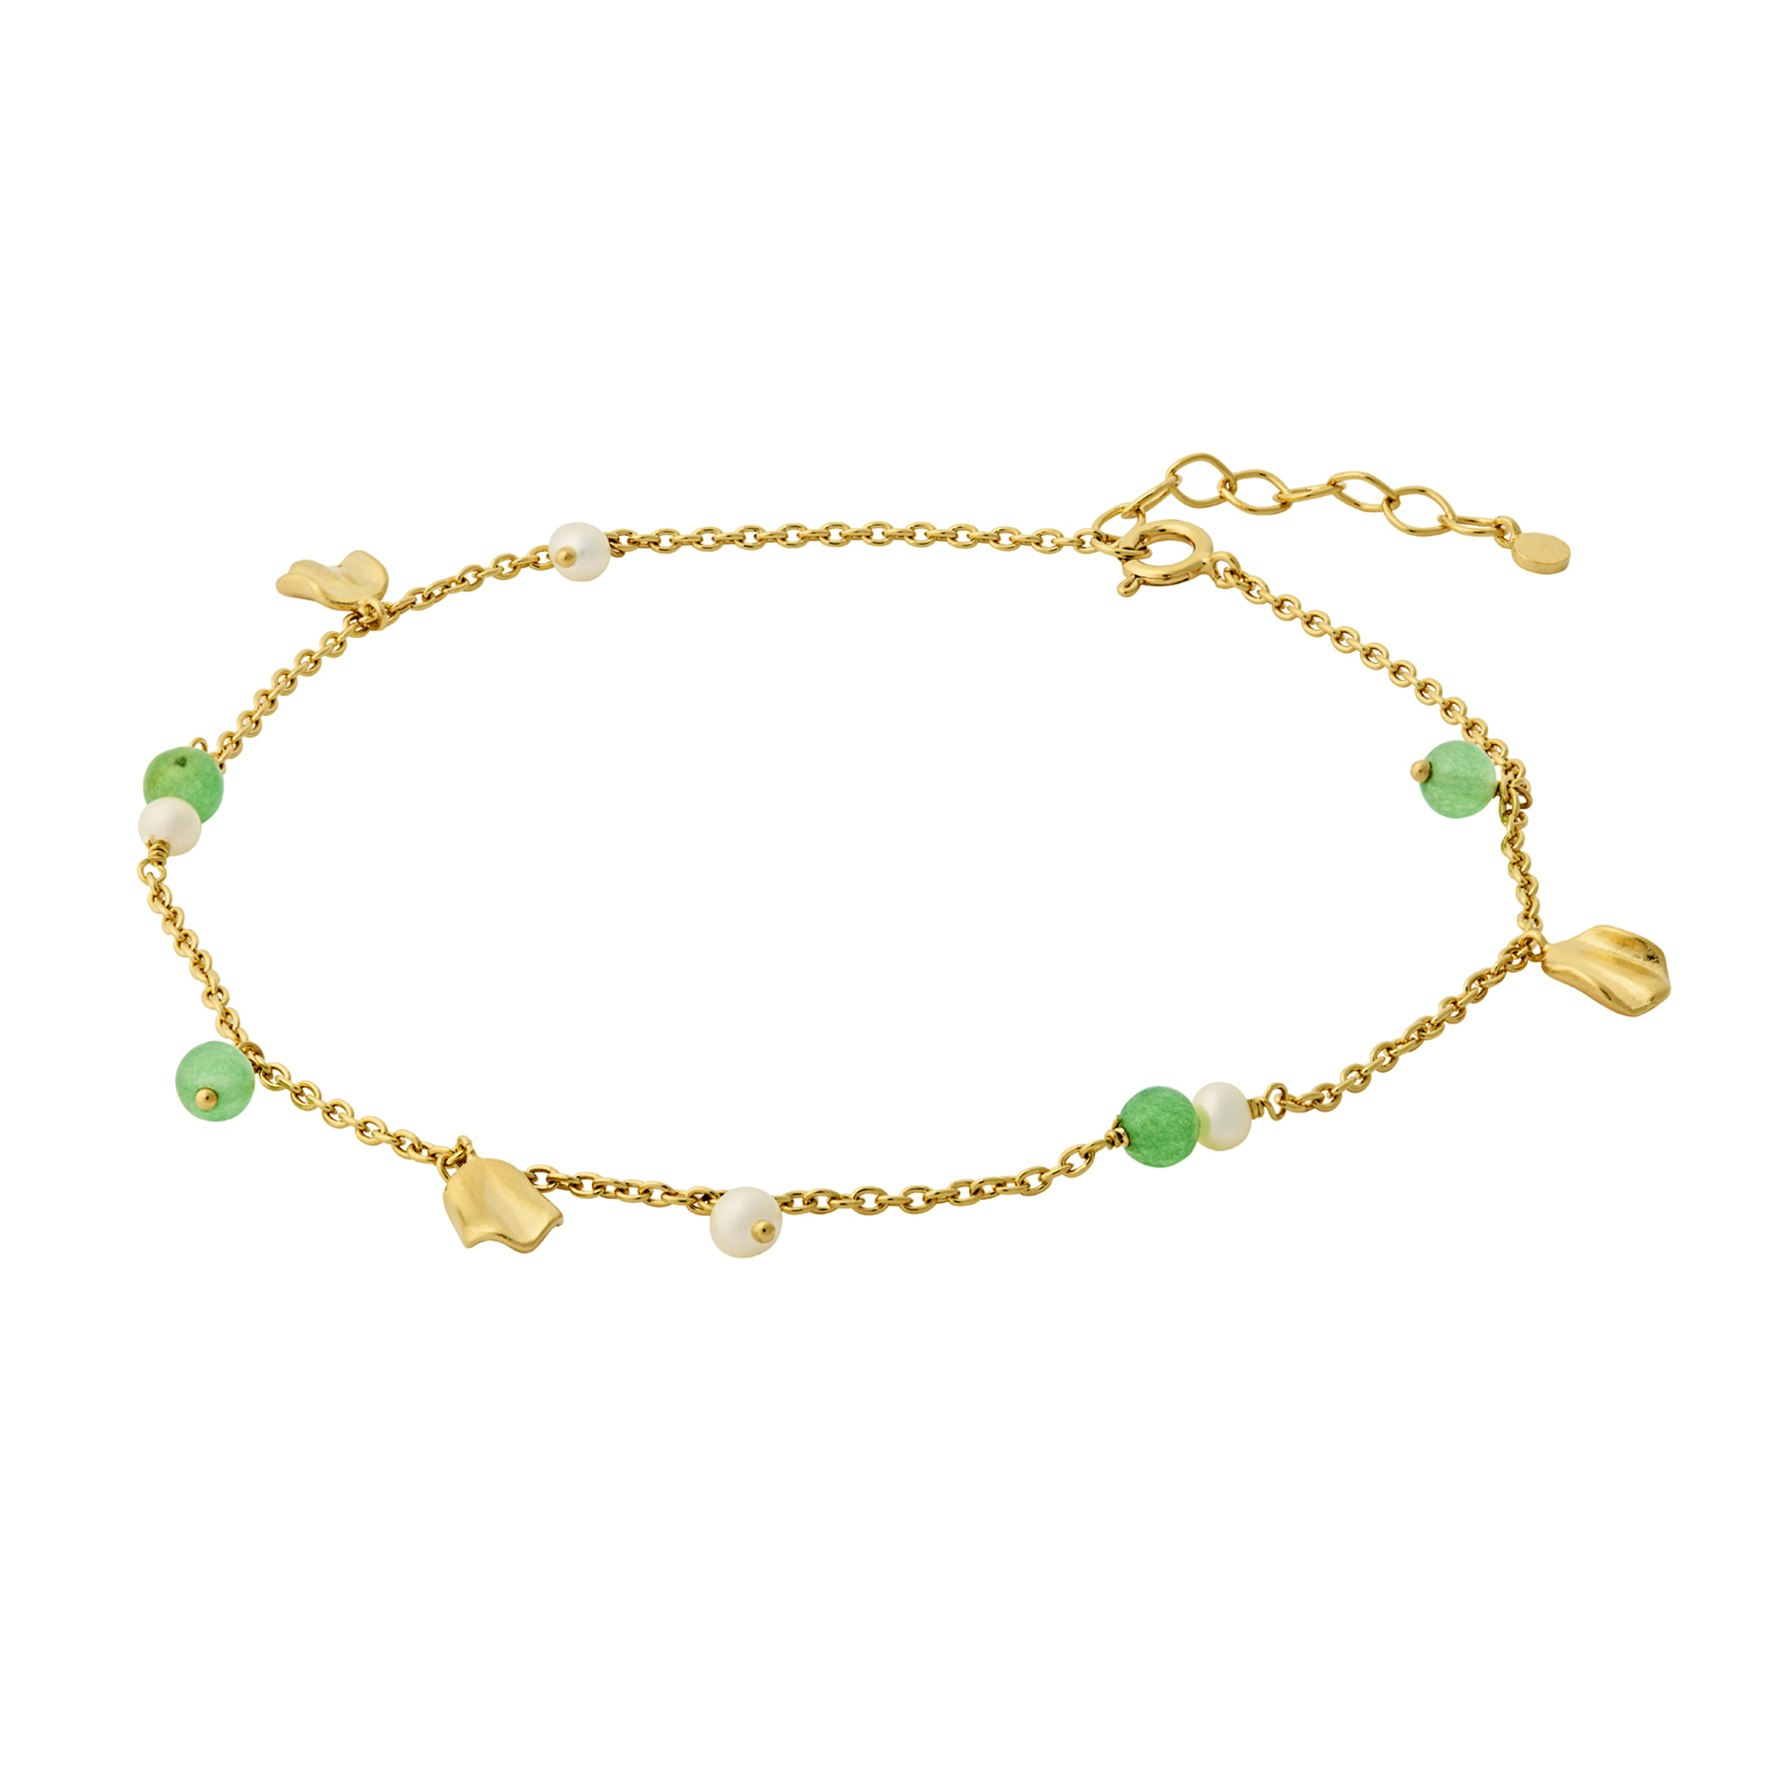 Ocean Hope Anklet from Pernille Corydon in Goldplated Silver Sterling 925